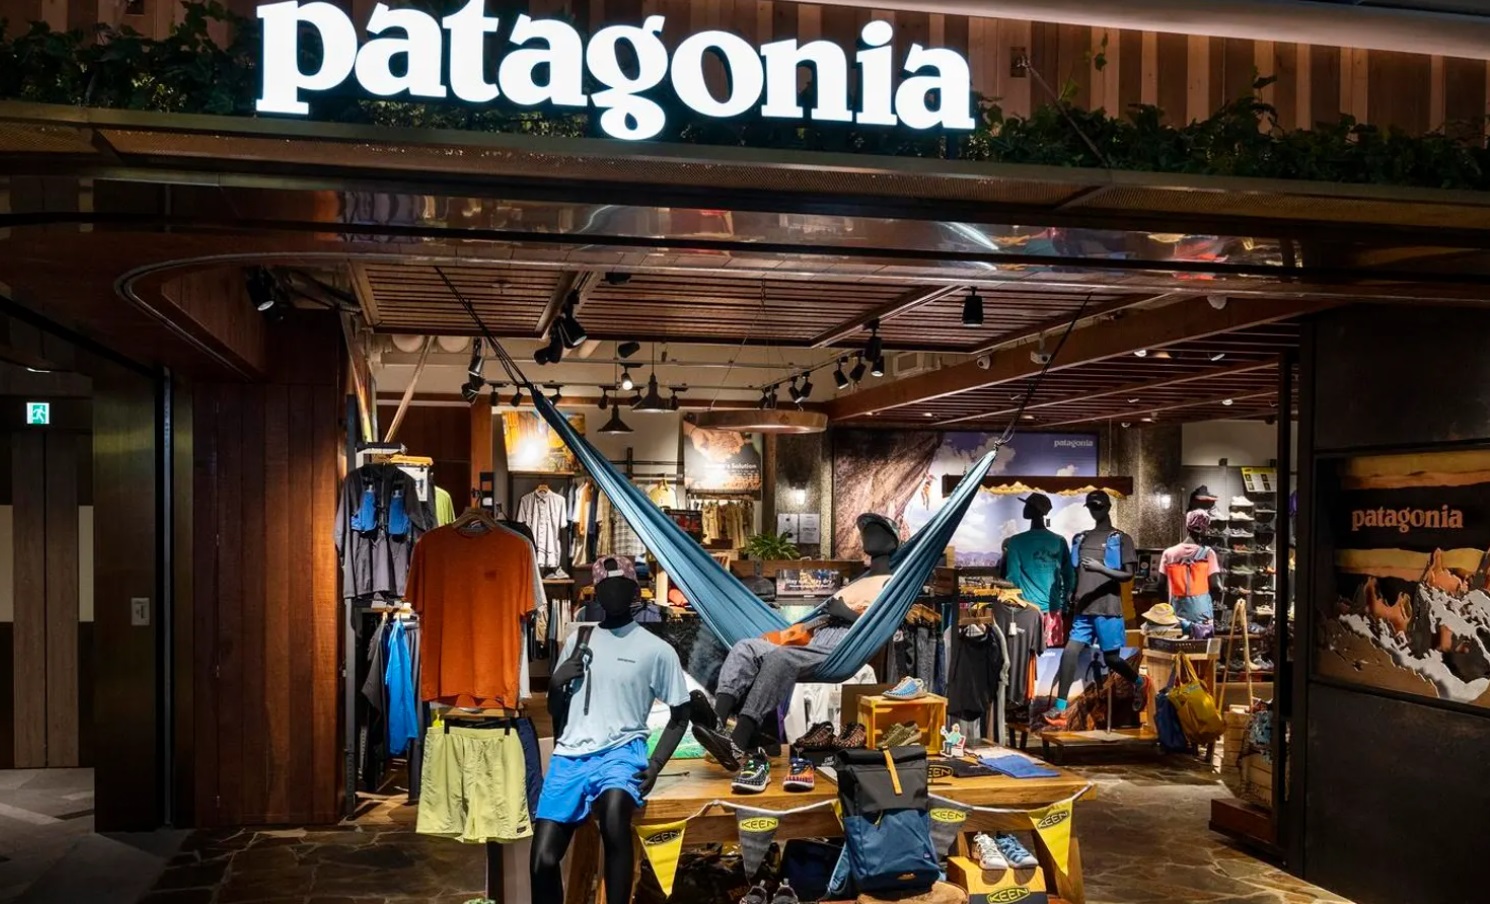 Patagonia's Anti-Consumerist Message: Can a clothing company be sustainable and profitable?